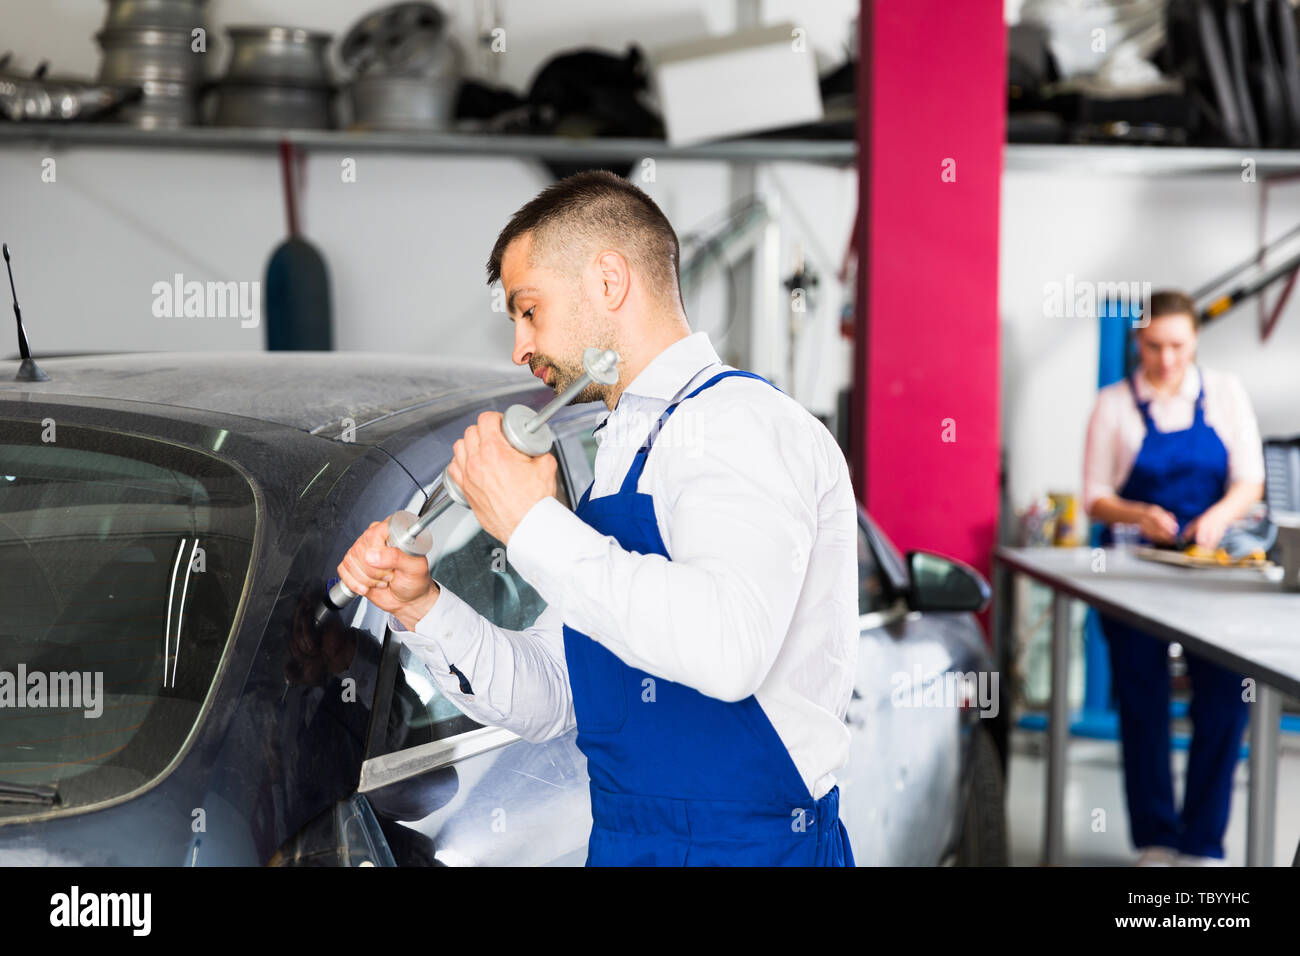 Concentrated mechanic performing car body repair at auto workshop with tools for repairing dents Stock Photo